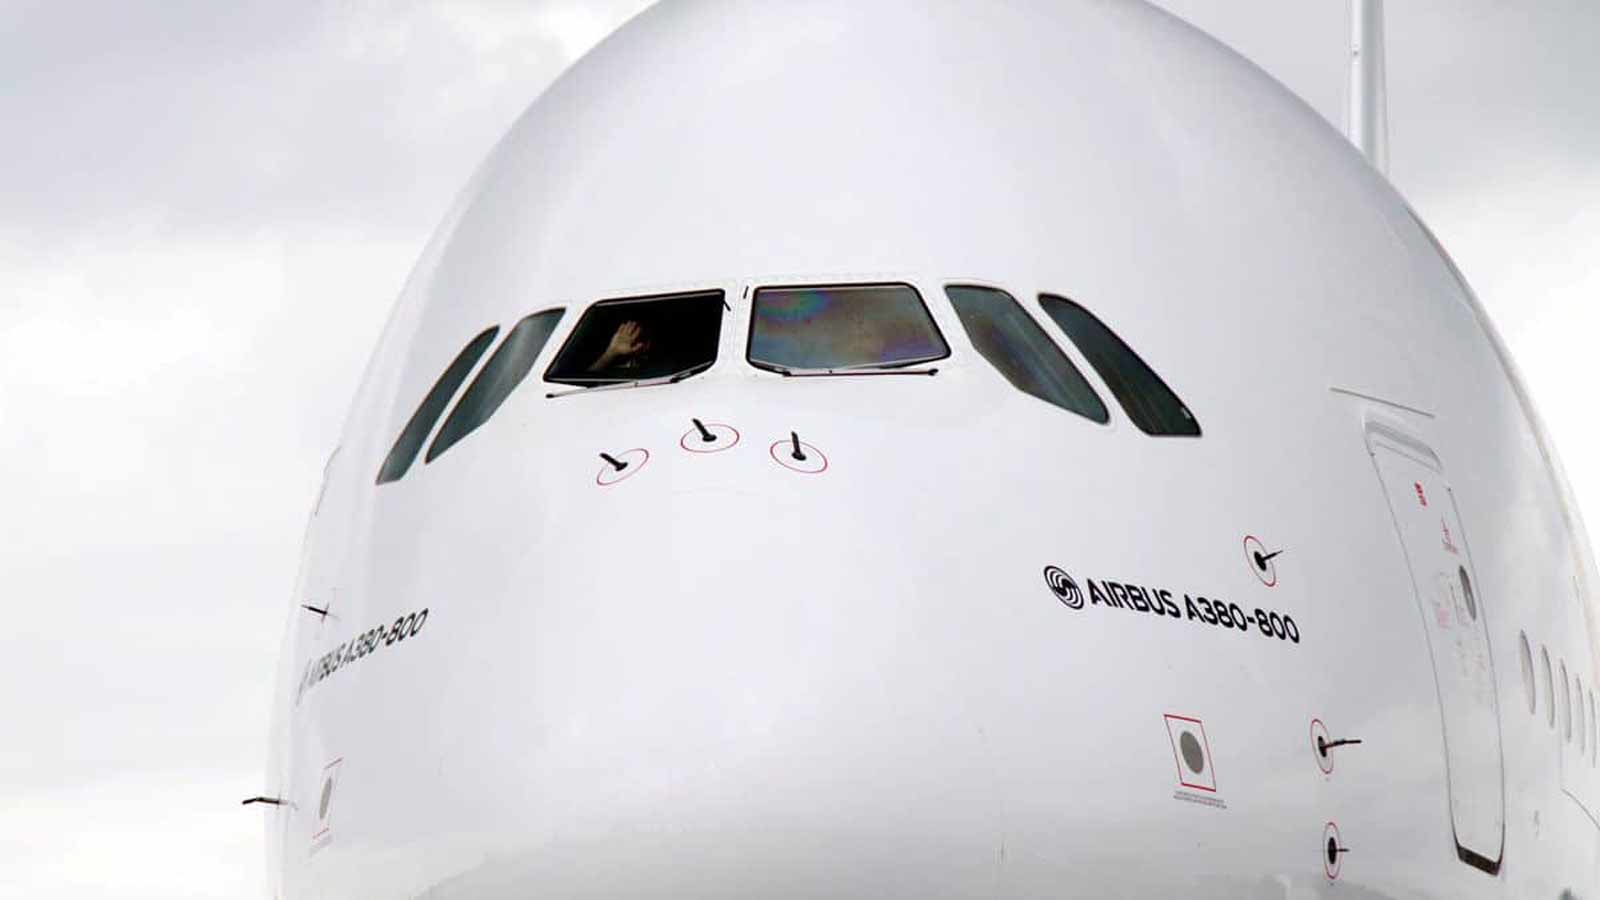 Hold Up, Emirates Wants Airbus To Build Even Bigger Jets…